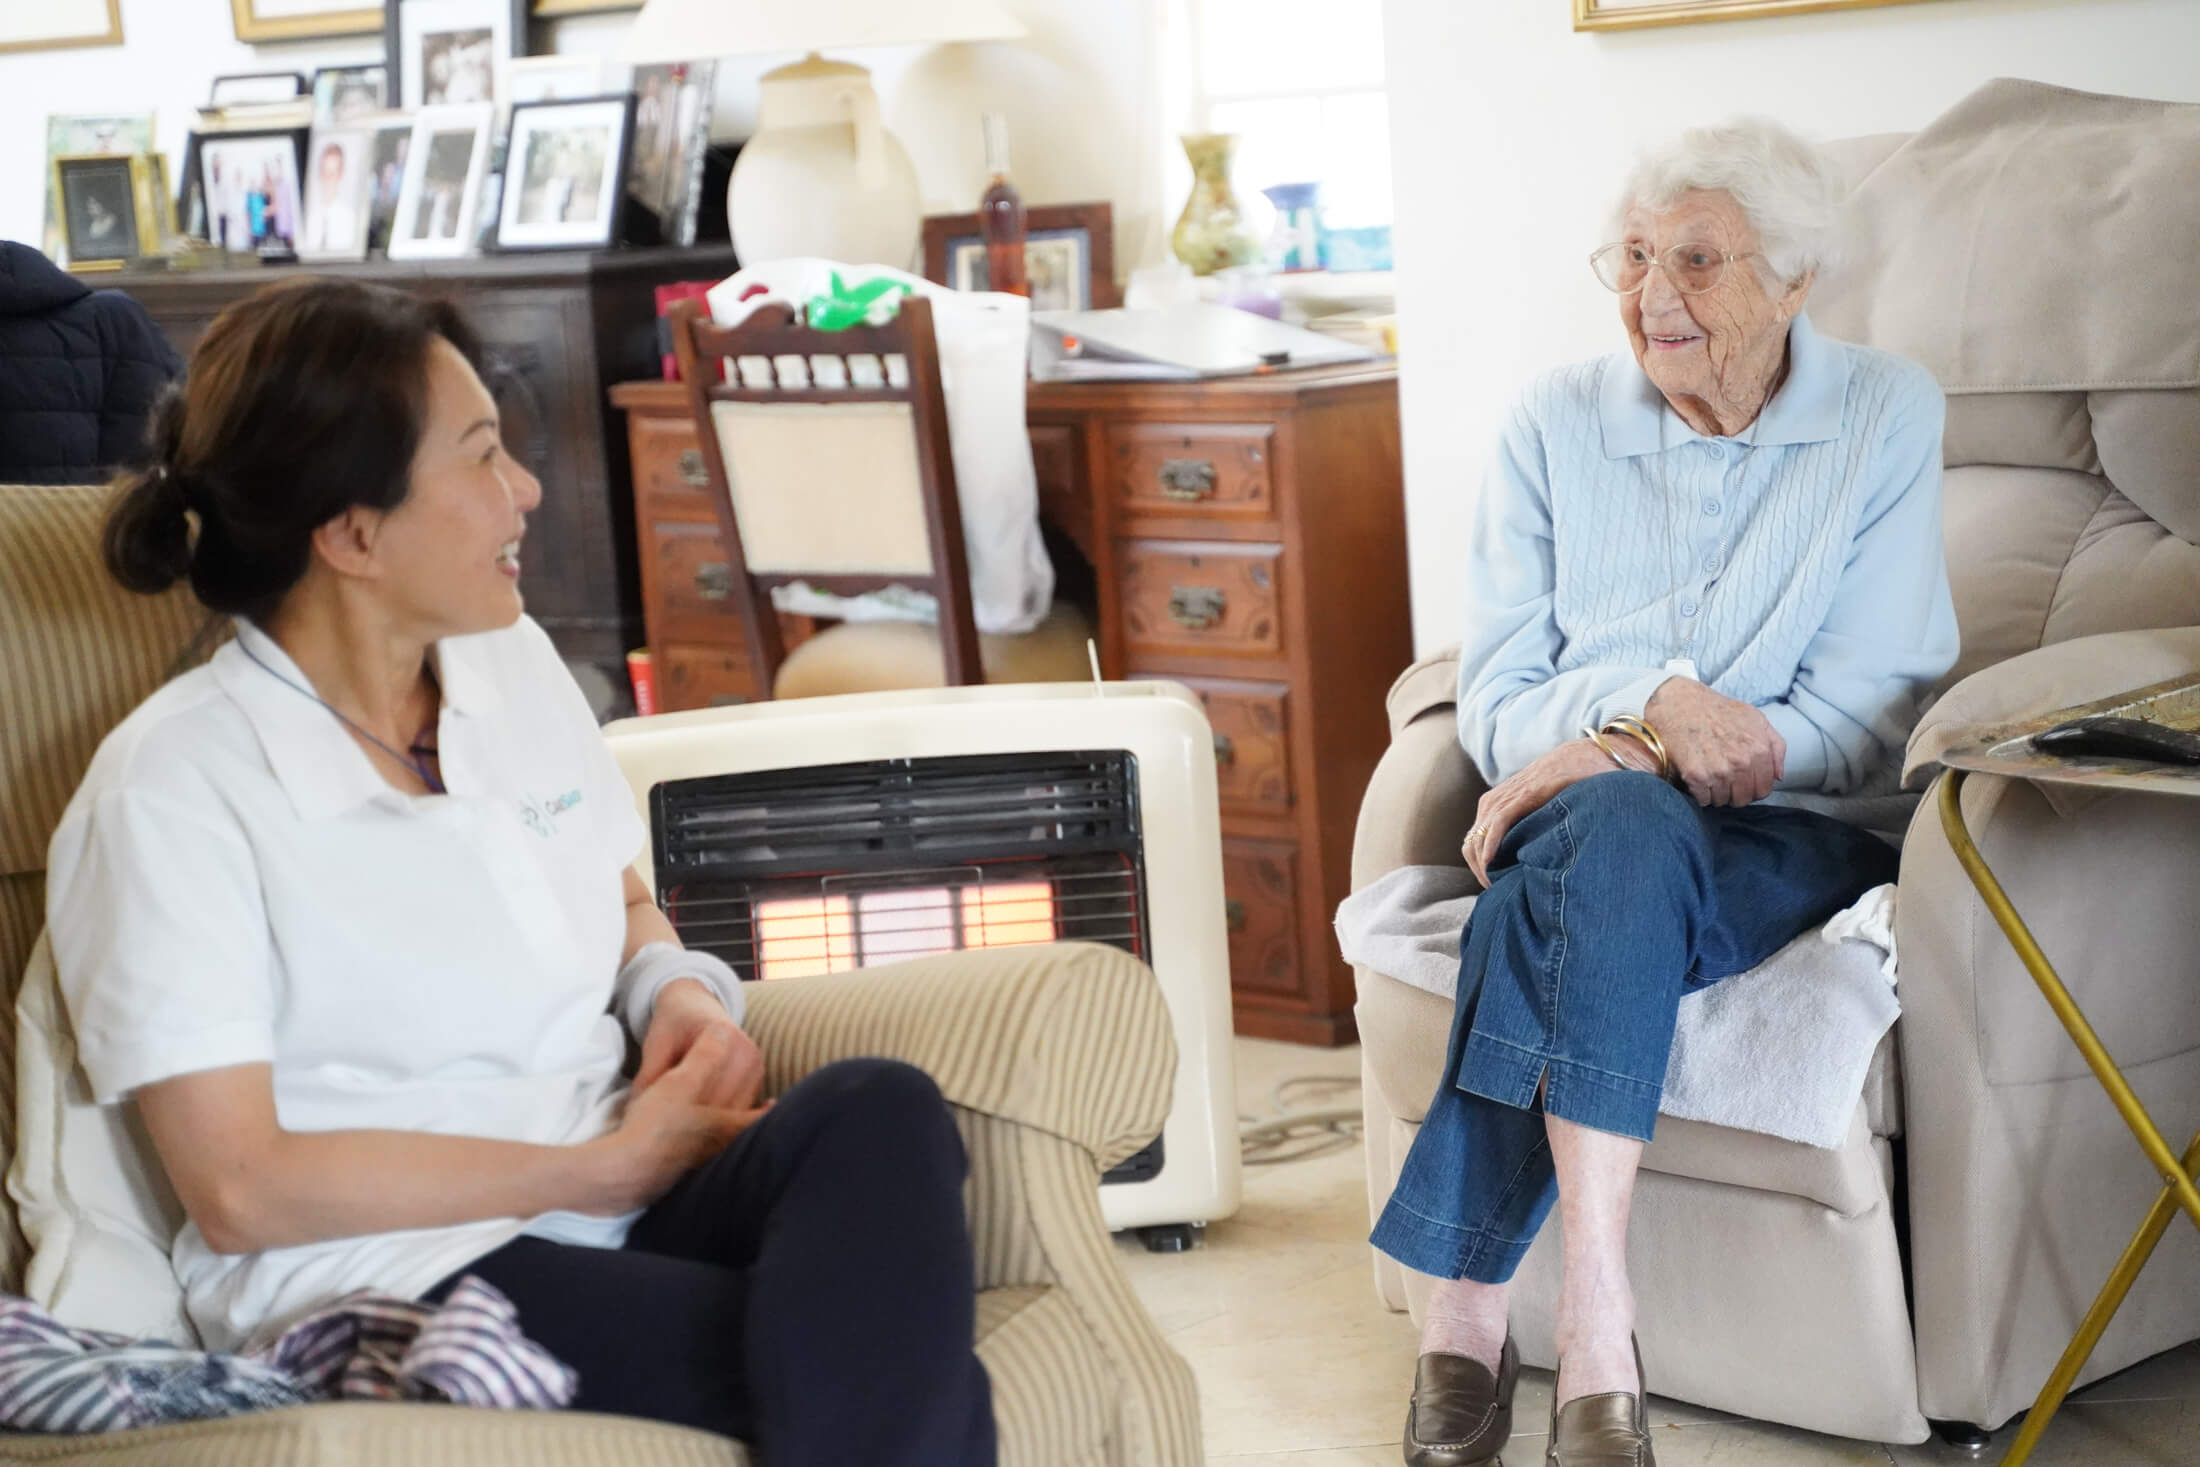 Respite home care allows a professional to assess their needs